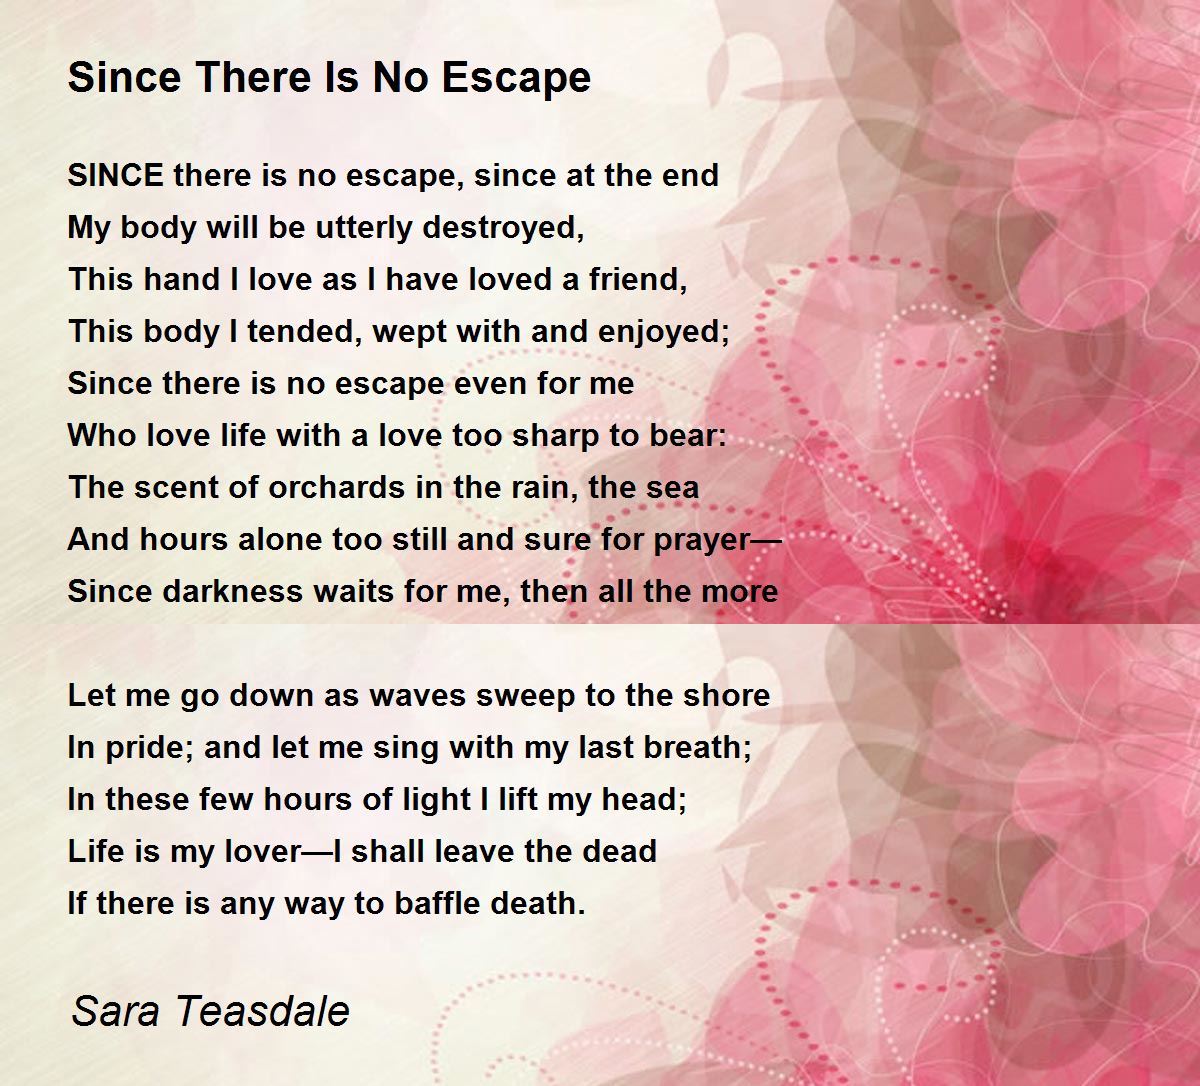 Since There Is No Escape Poem by Sara Teasdale - Poem Hunter